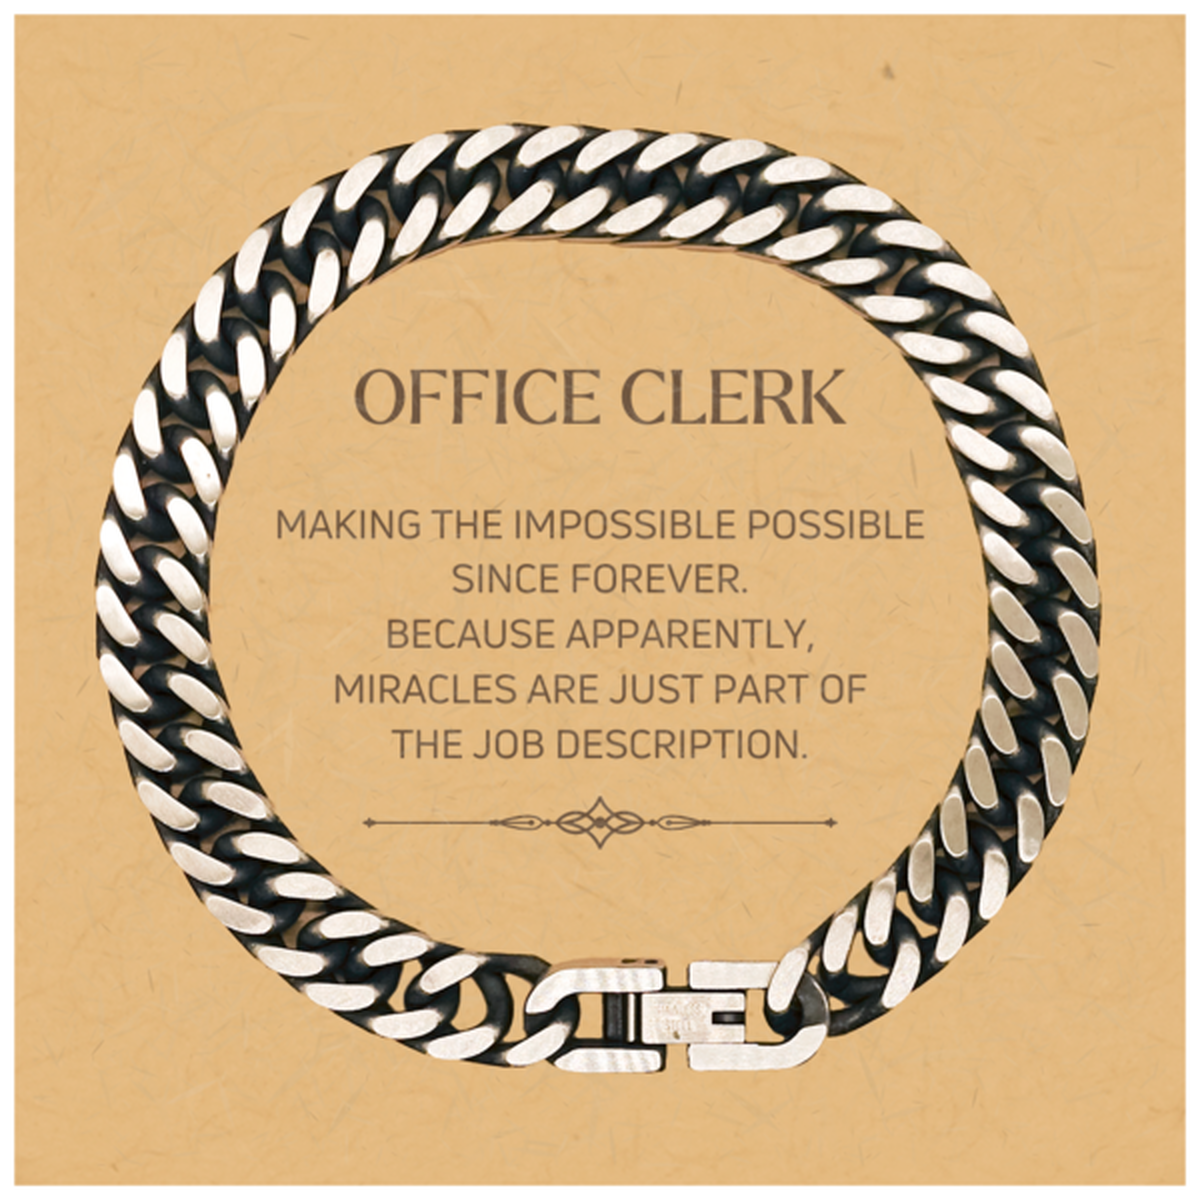 Funny Office Clerk Gifts, Miracles are just part of the job description, Inspirational Birthday Christmas Cuban Link Chain Bracelet For Office Clerk, Men, Women, Coworkers, Friends, Boss